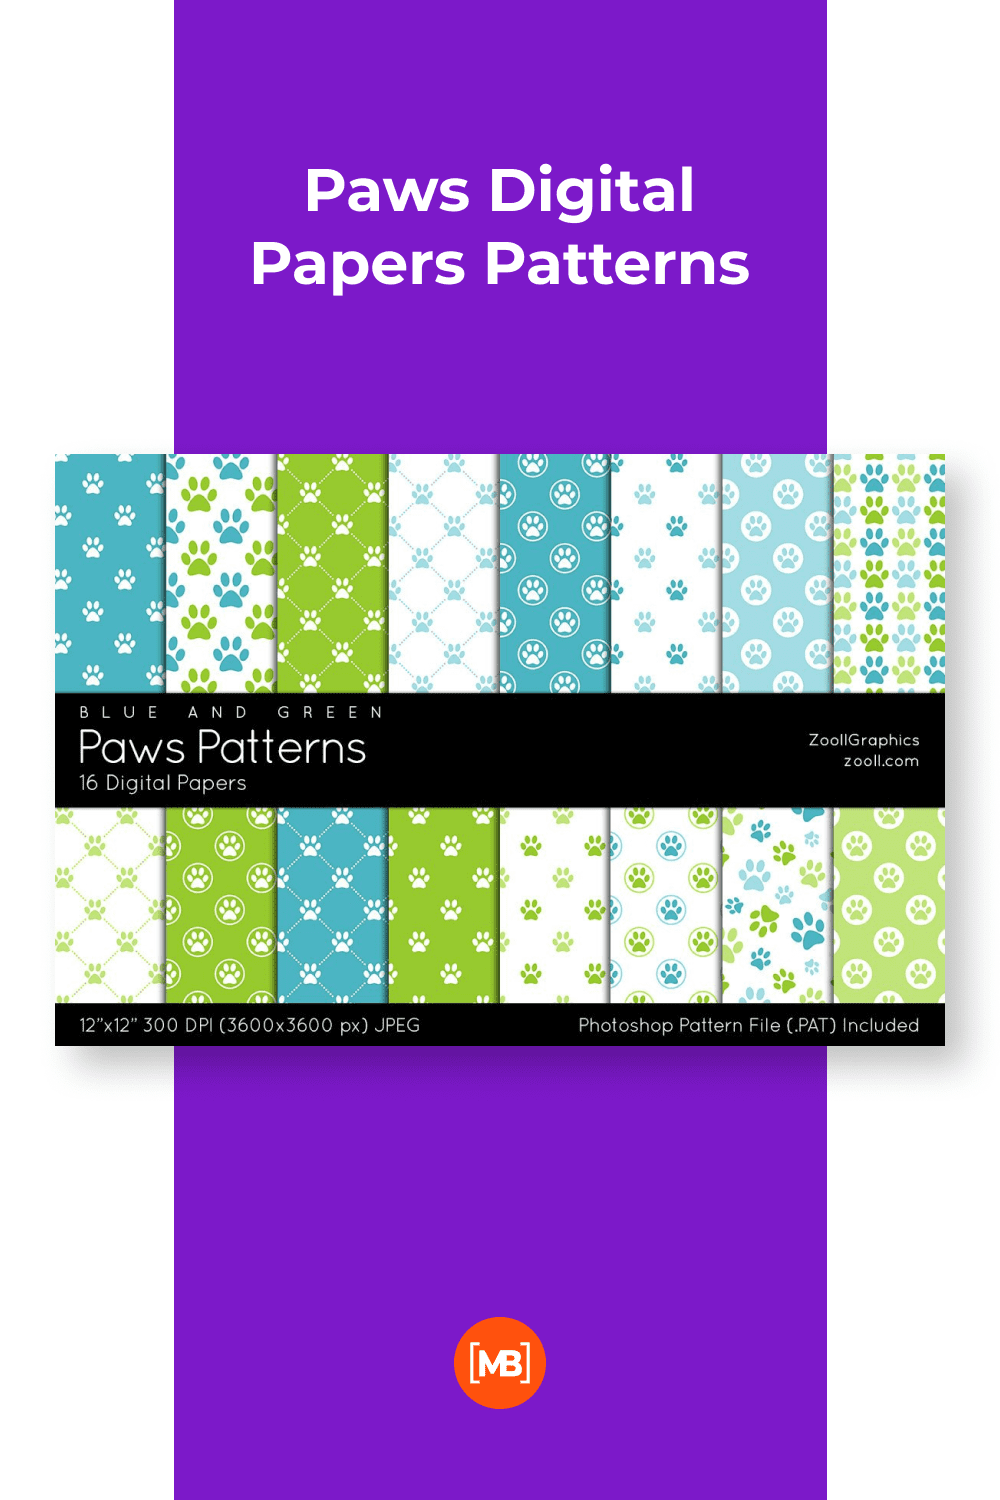 Paws Digital Papers Patterns.